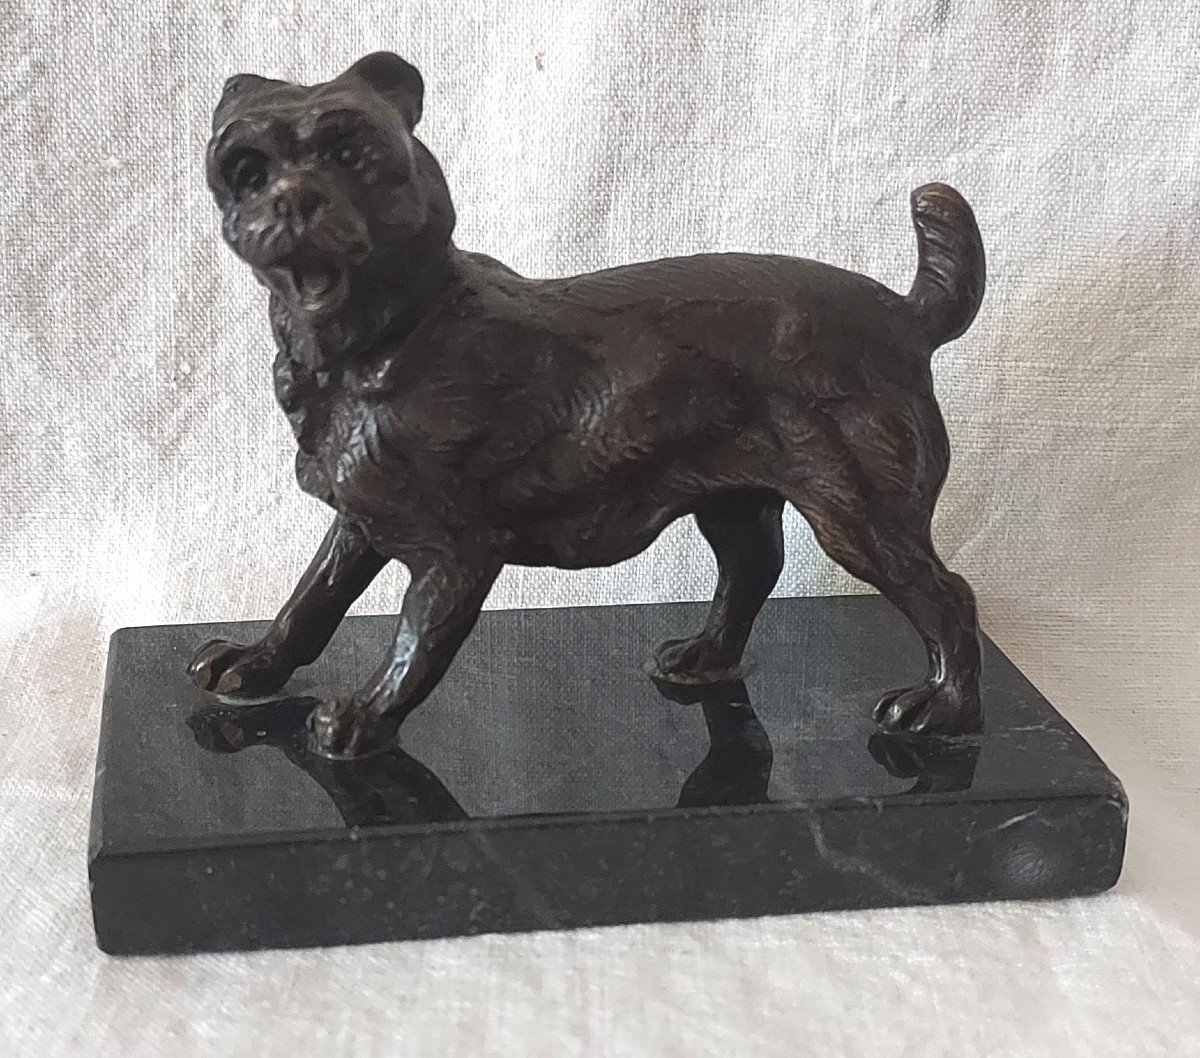 Pyrenees Labri Dog In Bronze With Medal Patina On Its Marble Terrace From The 19th Century